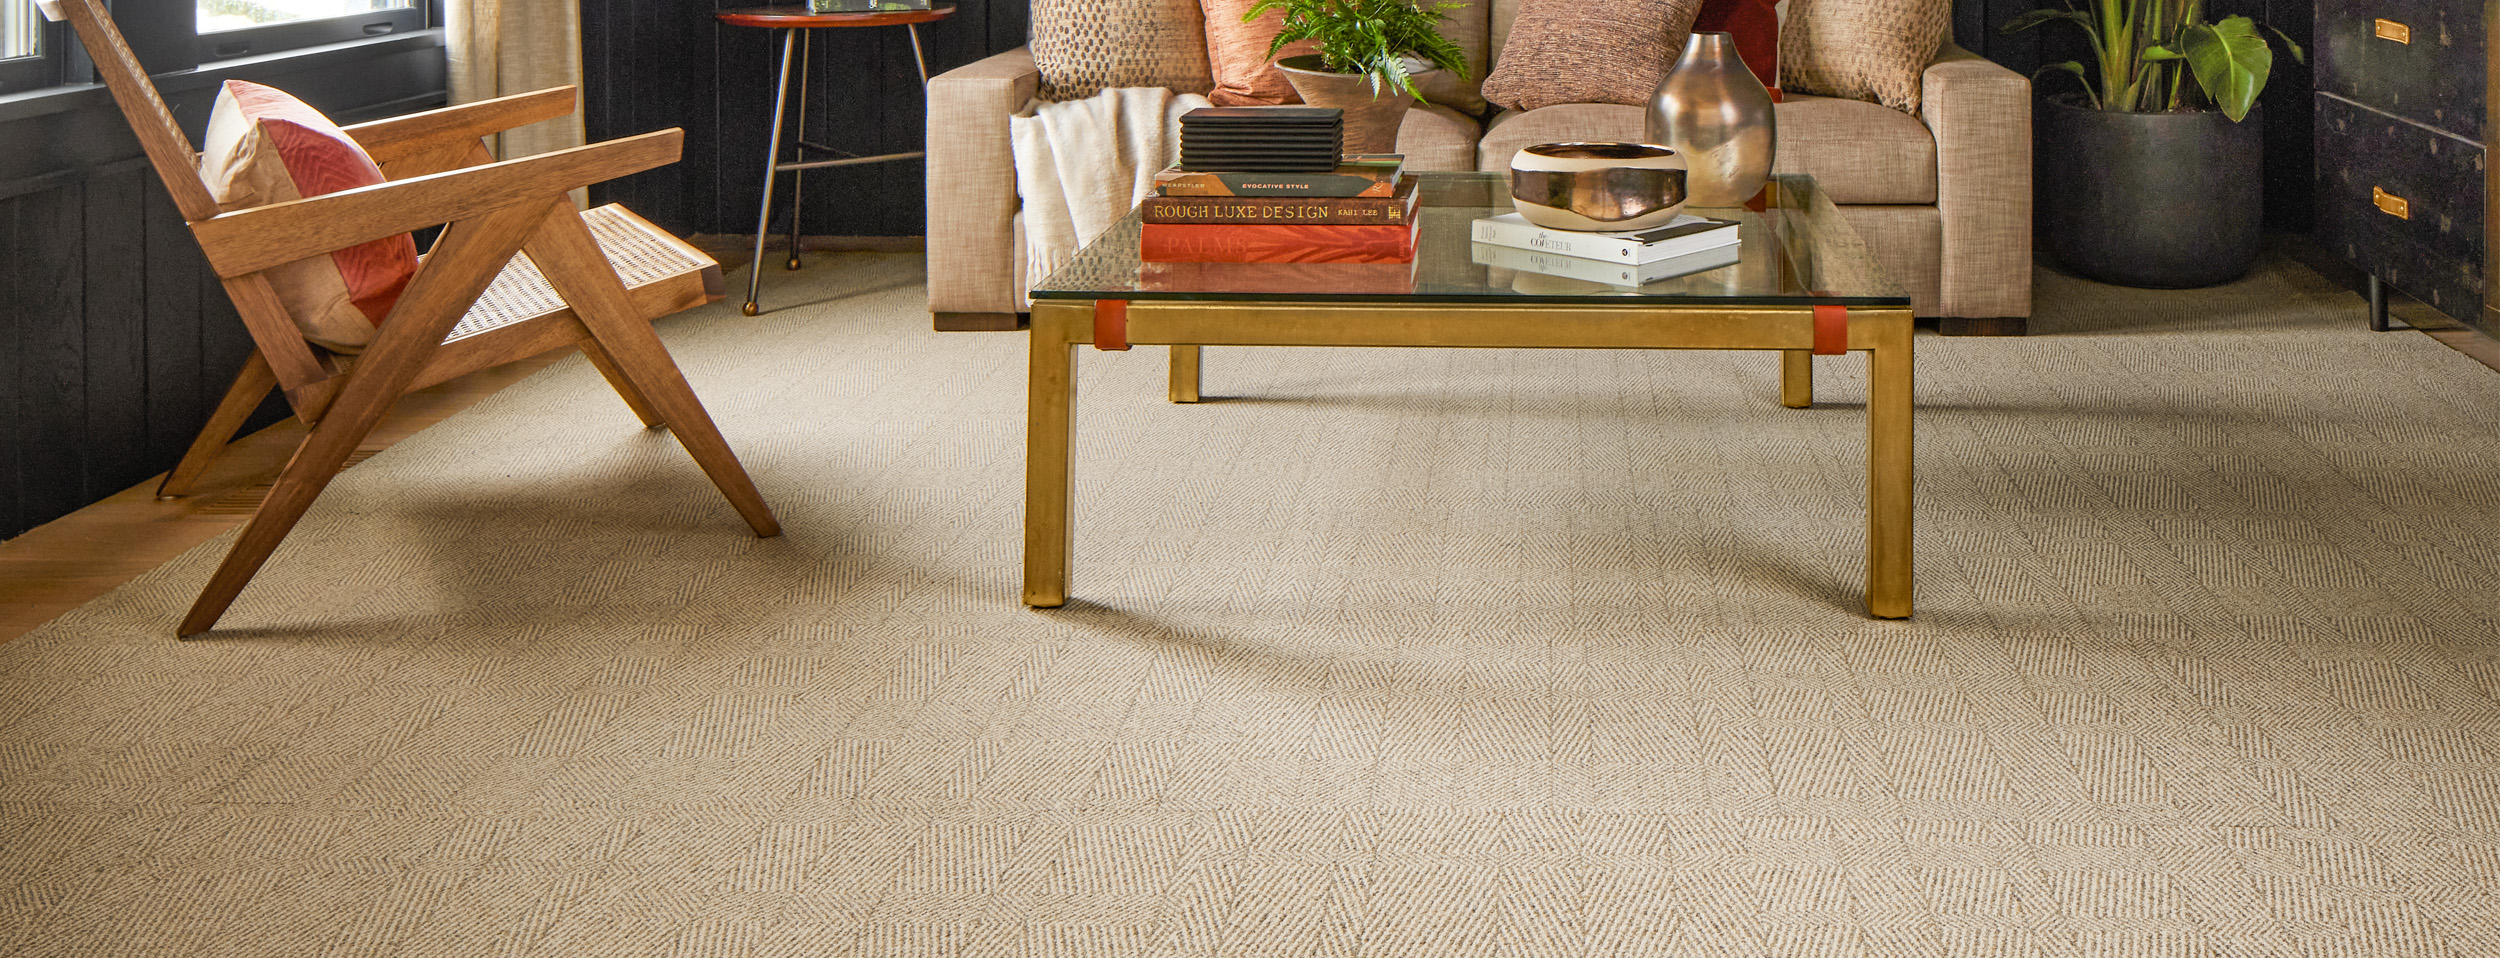 Tweed Indeed - Maize: Patterned Area Rugs & Carpet Tiles by FLOR